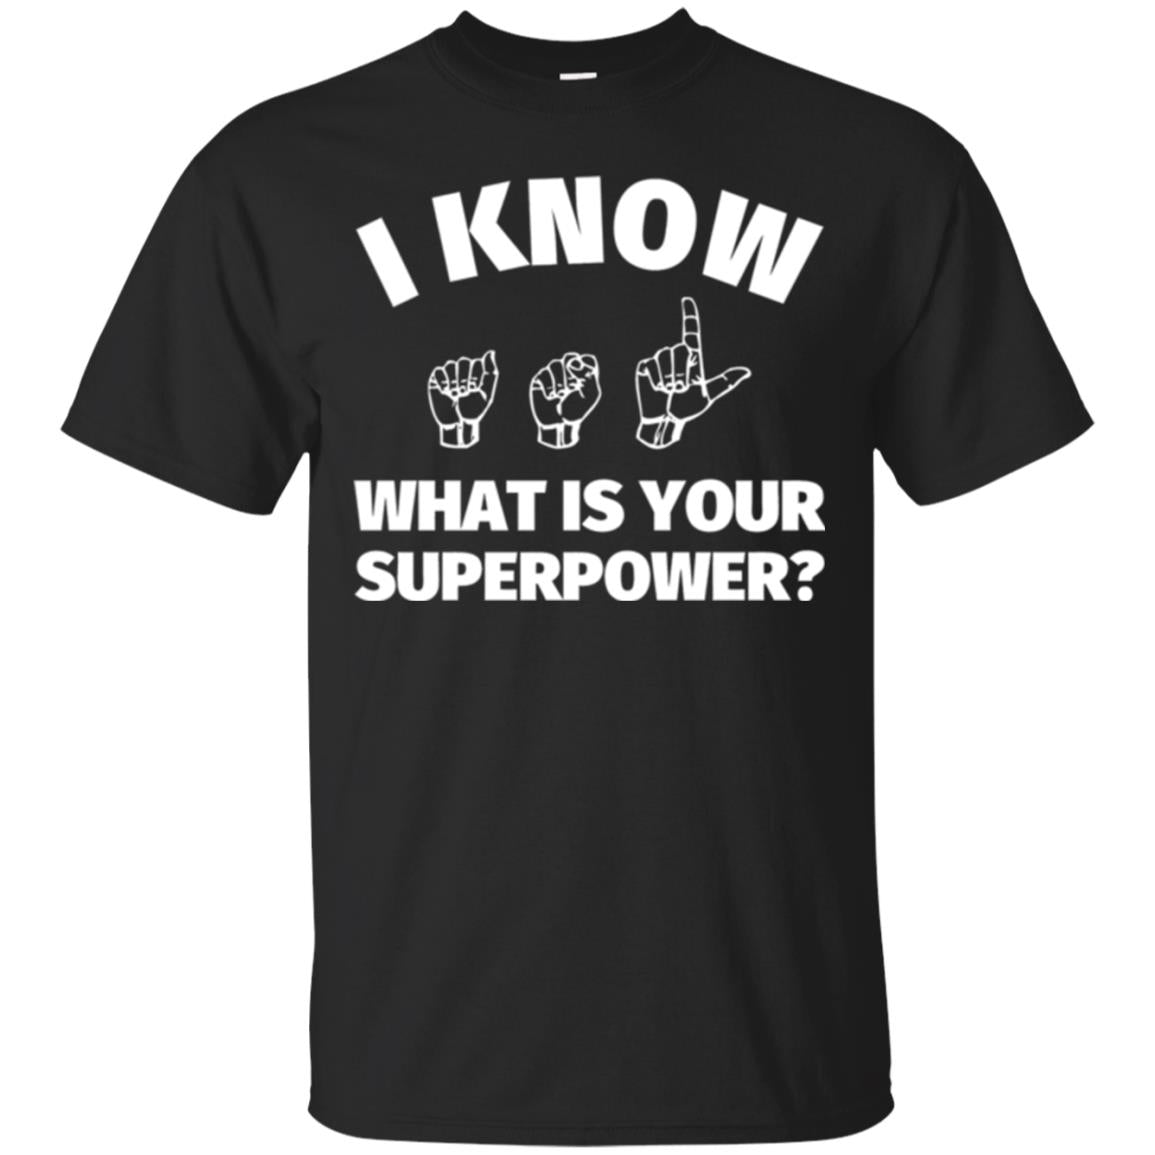 American Sign Language T-shirt I Know What Is Your Supperpower